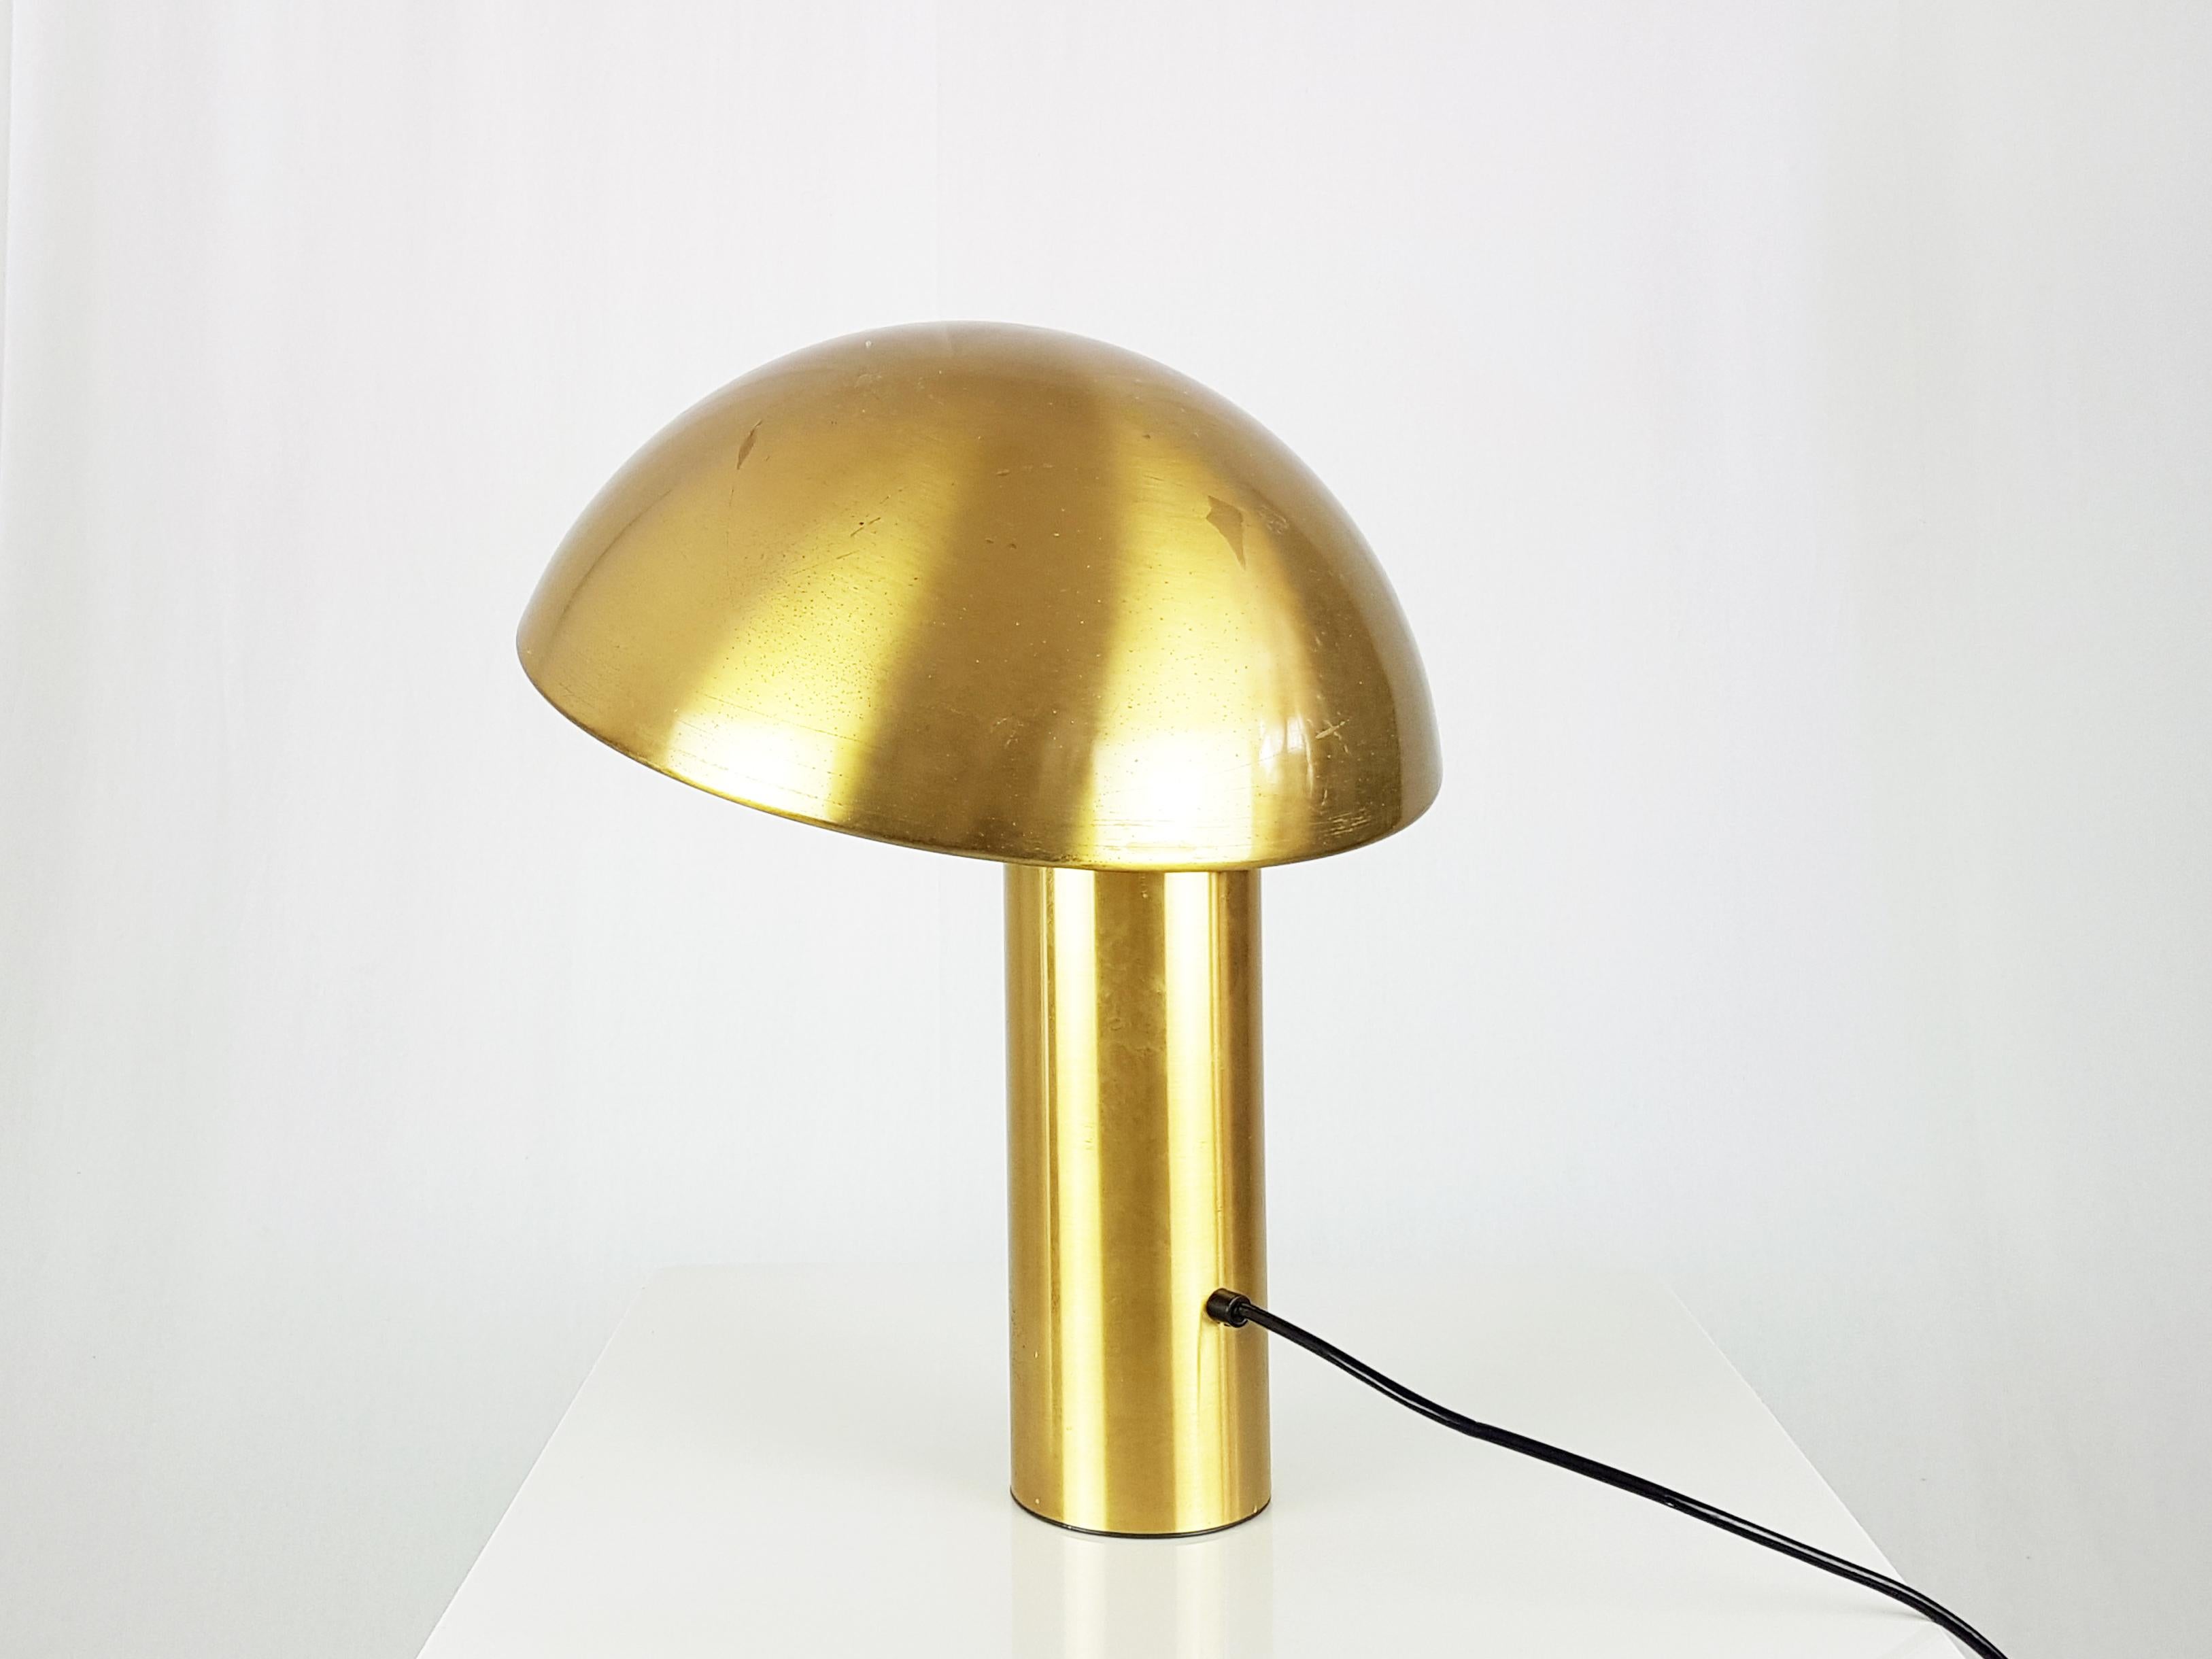 Brushed Brass Vaga Table Lamp by Franco Mirenzi for Valenti, 1978 In Good Condition For Sale In Varese, Lombardia